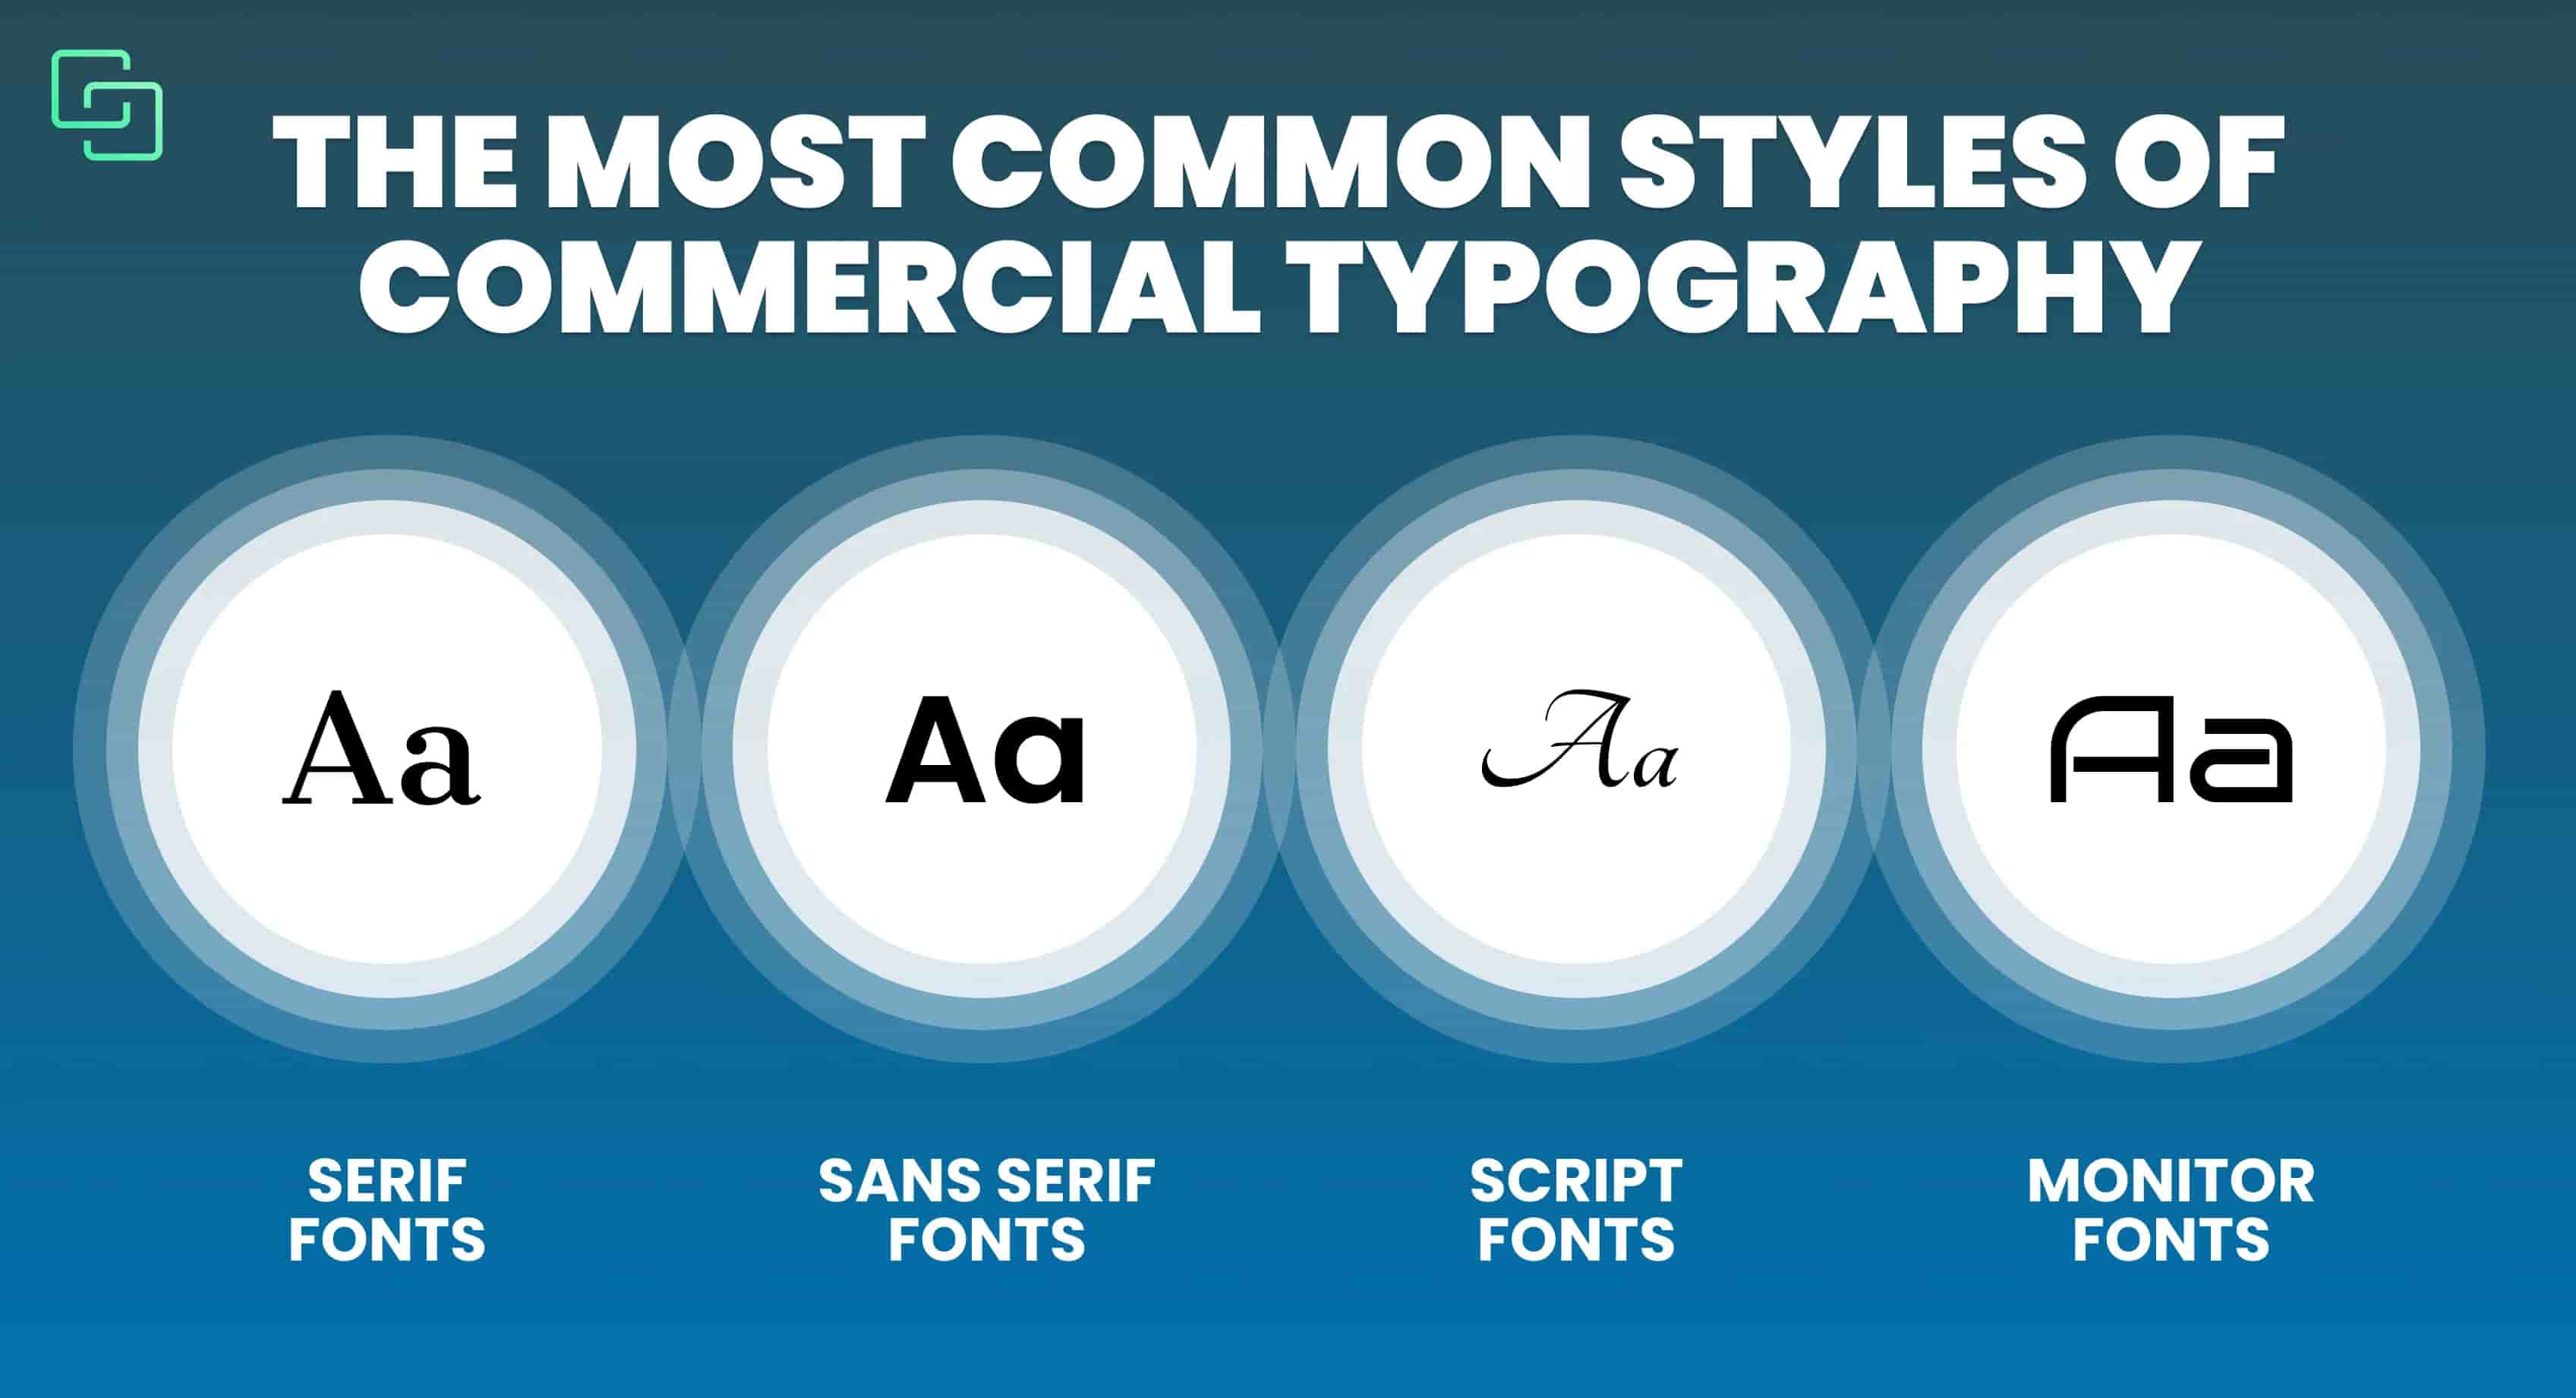 TypeType® Foundry  Buy Fonts For Commercial Use